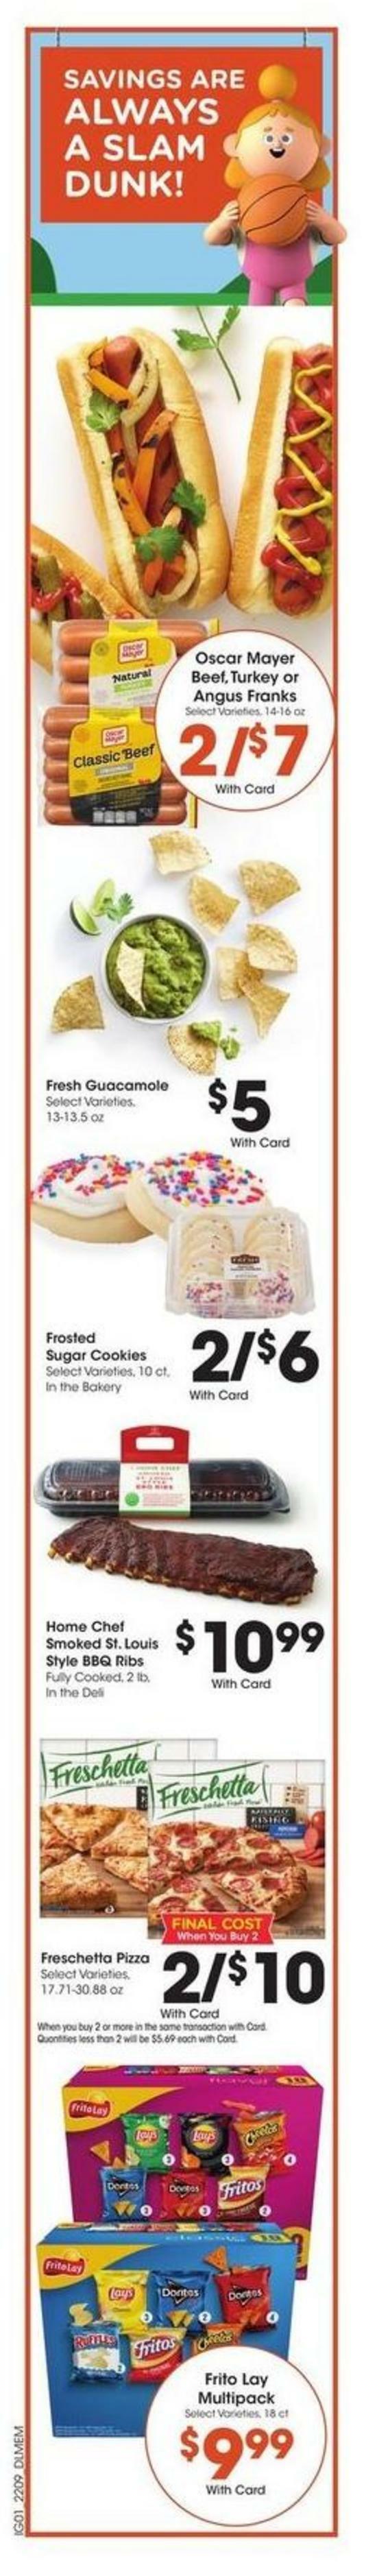 Kroger Weekly Ad from March 30